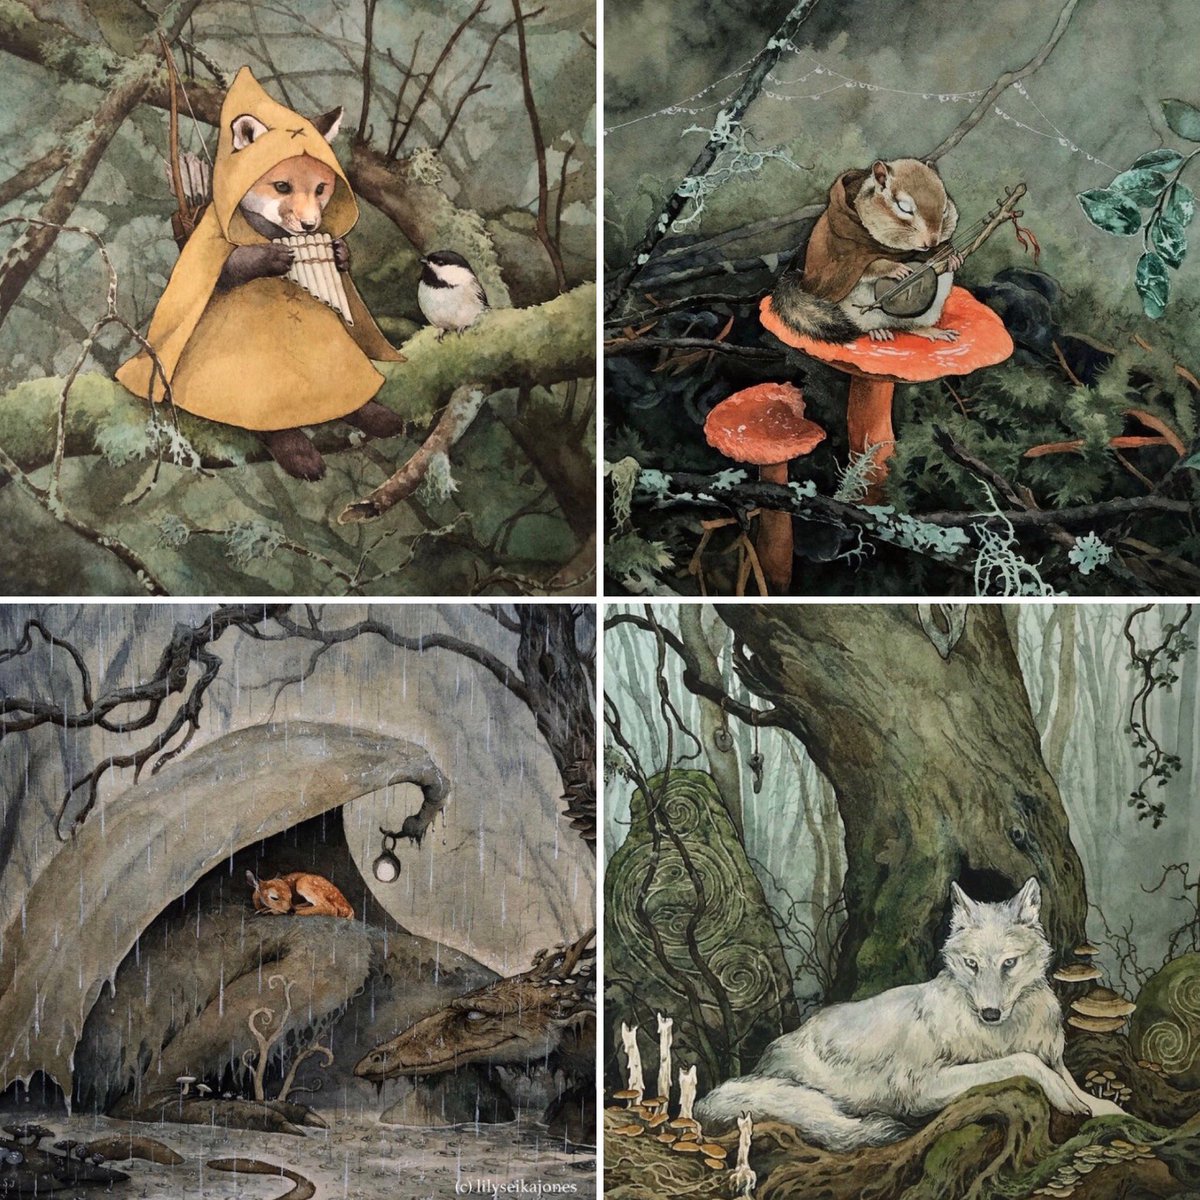 “The to- and-fro conflicting wind and rain. This night ... the cub-drawn bear would couch, the lion and the belly-pinched wolf keep their fur dry...”

#Shakespeare King Lear 
#BookWormSat #BookChatWeekly 
#ShakespeareSunday #WorldMetDay 

#Art: Lily Seika Jones